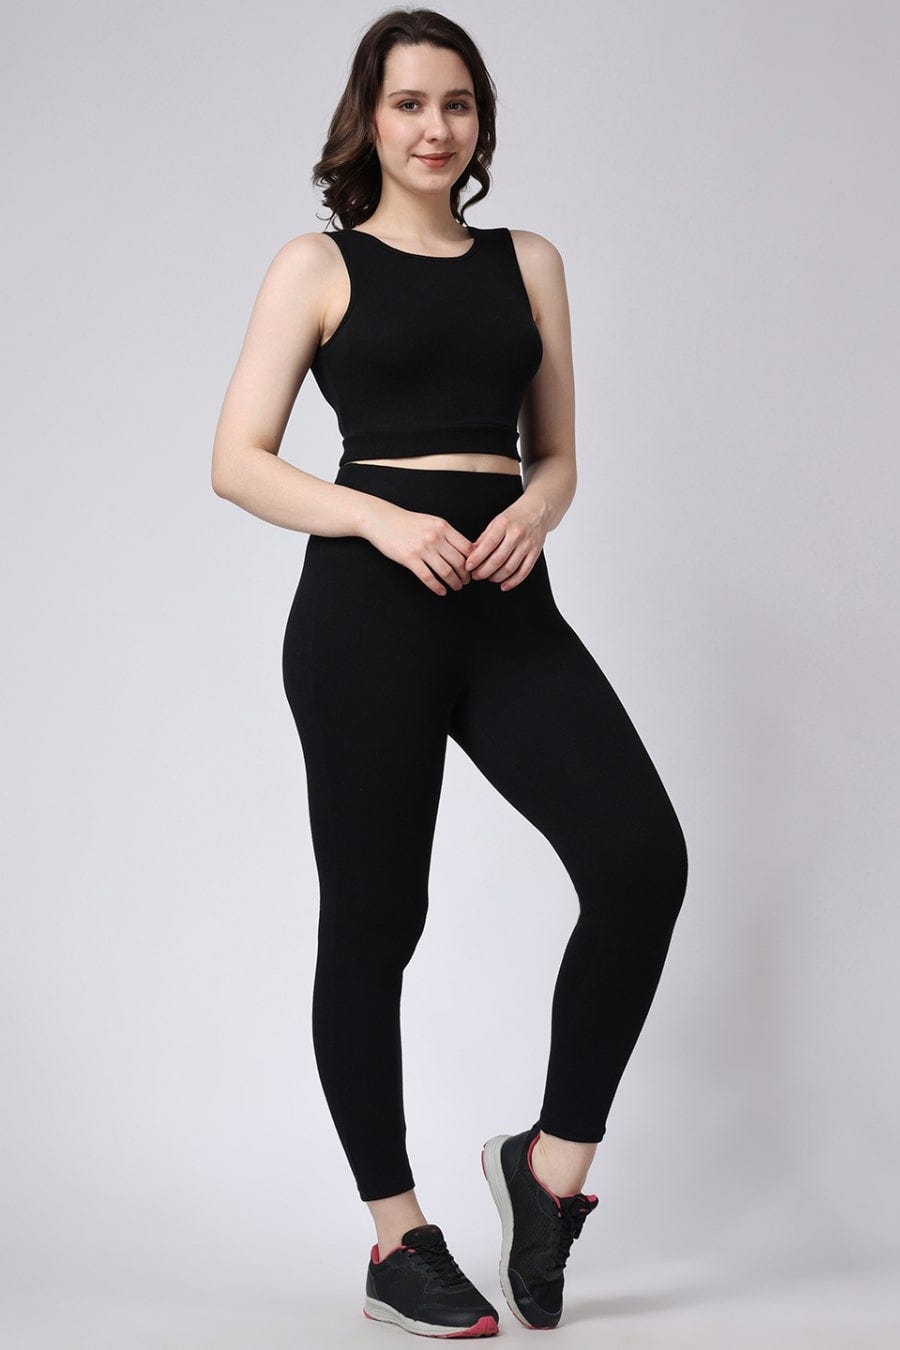 Empower Your Workout with Stellar Style: 10 Fashionable Workout Outfits for  Women, by The Label Bar